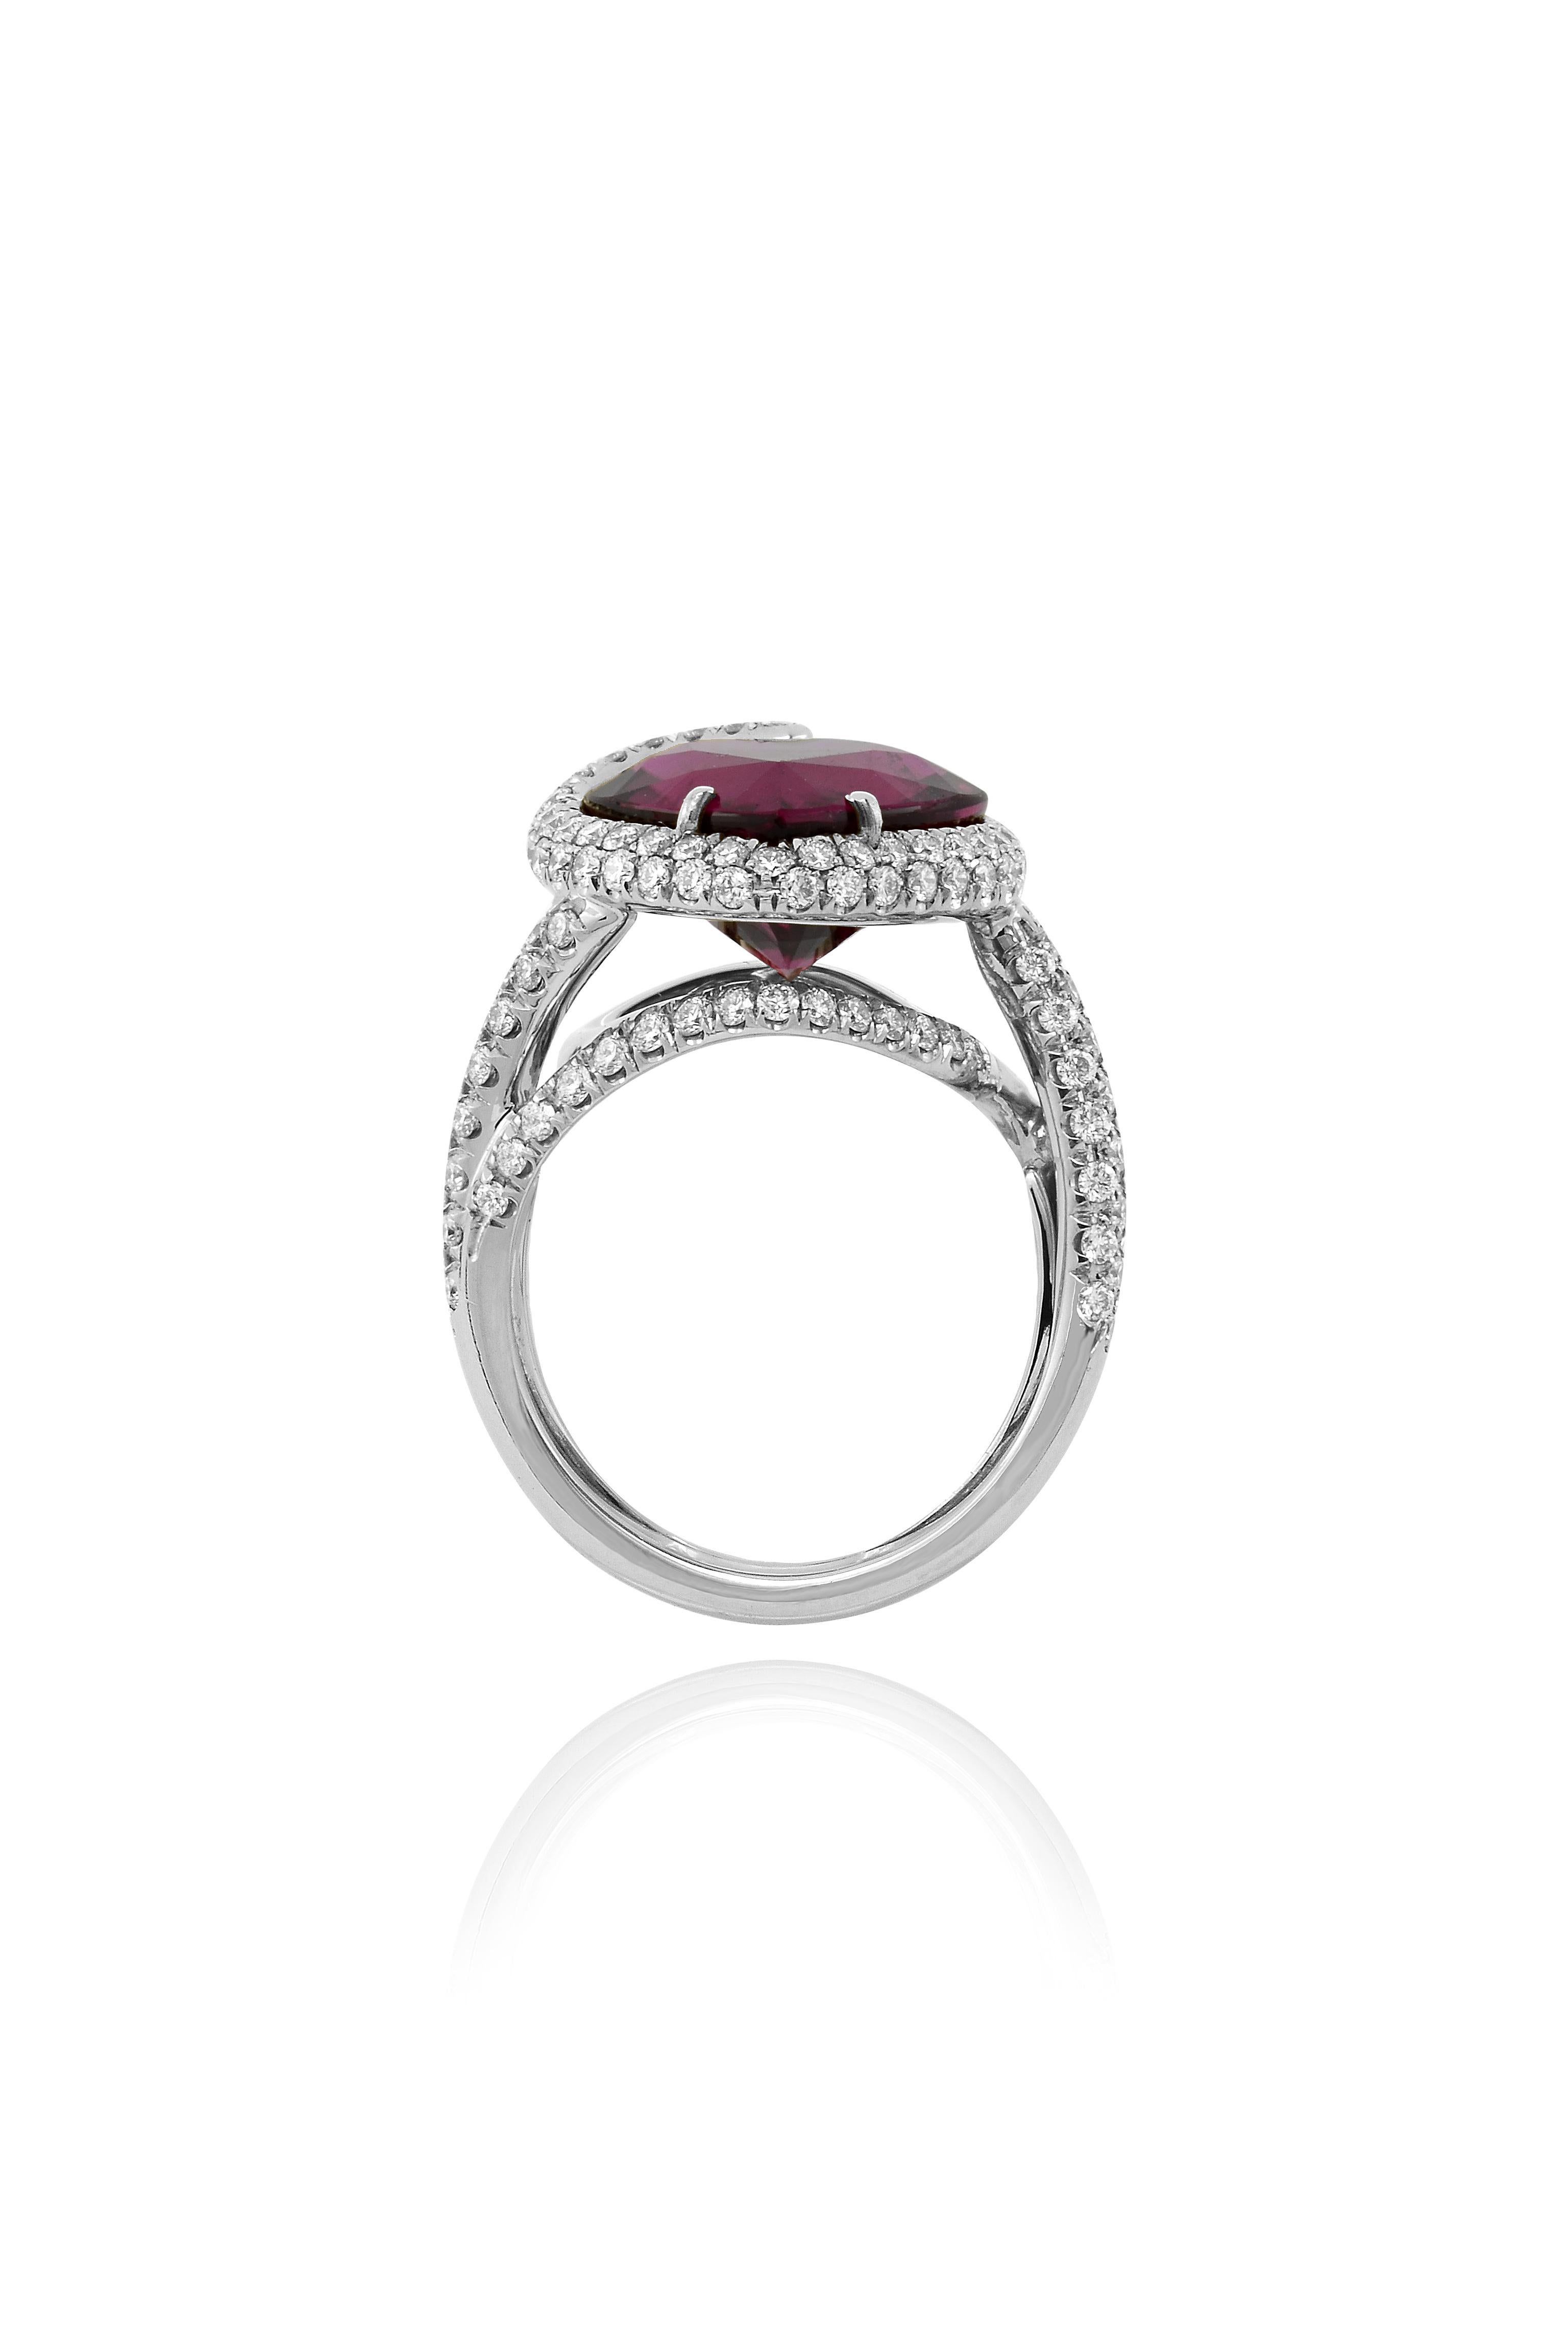 This enchanting ring  had been handcrafted  in Margherita Burgener workshop, based in Italy.
The ring centers a beautiful, clean, vivid red, heart shaped rubellite tourmaline. 

Matching earrings are shown in the gallery and can be  bought